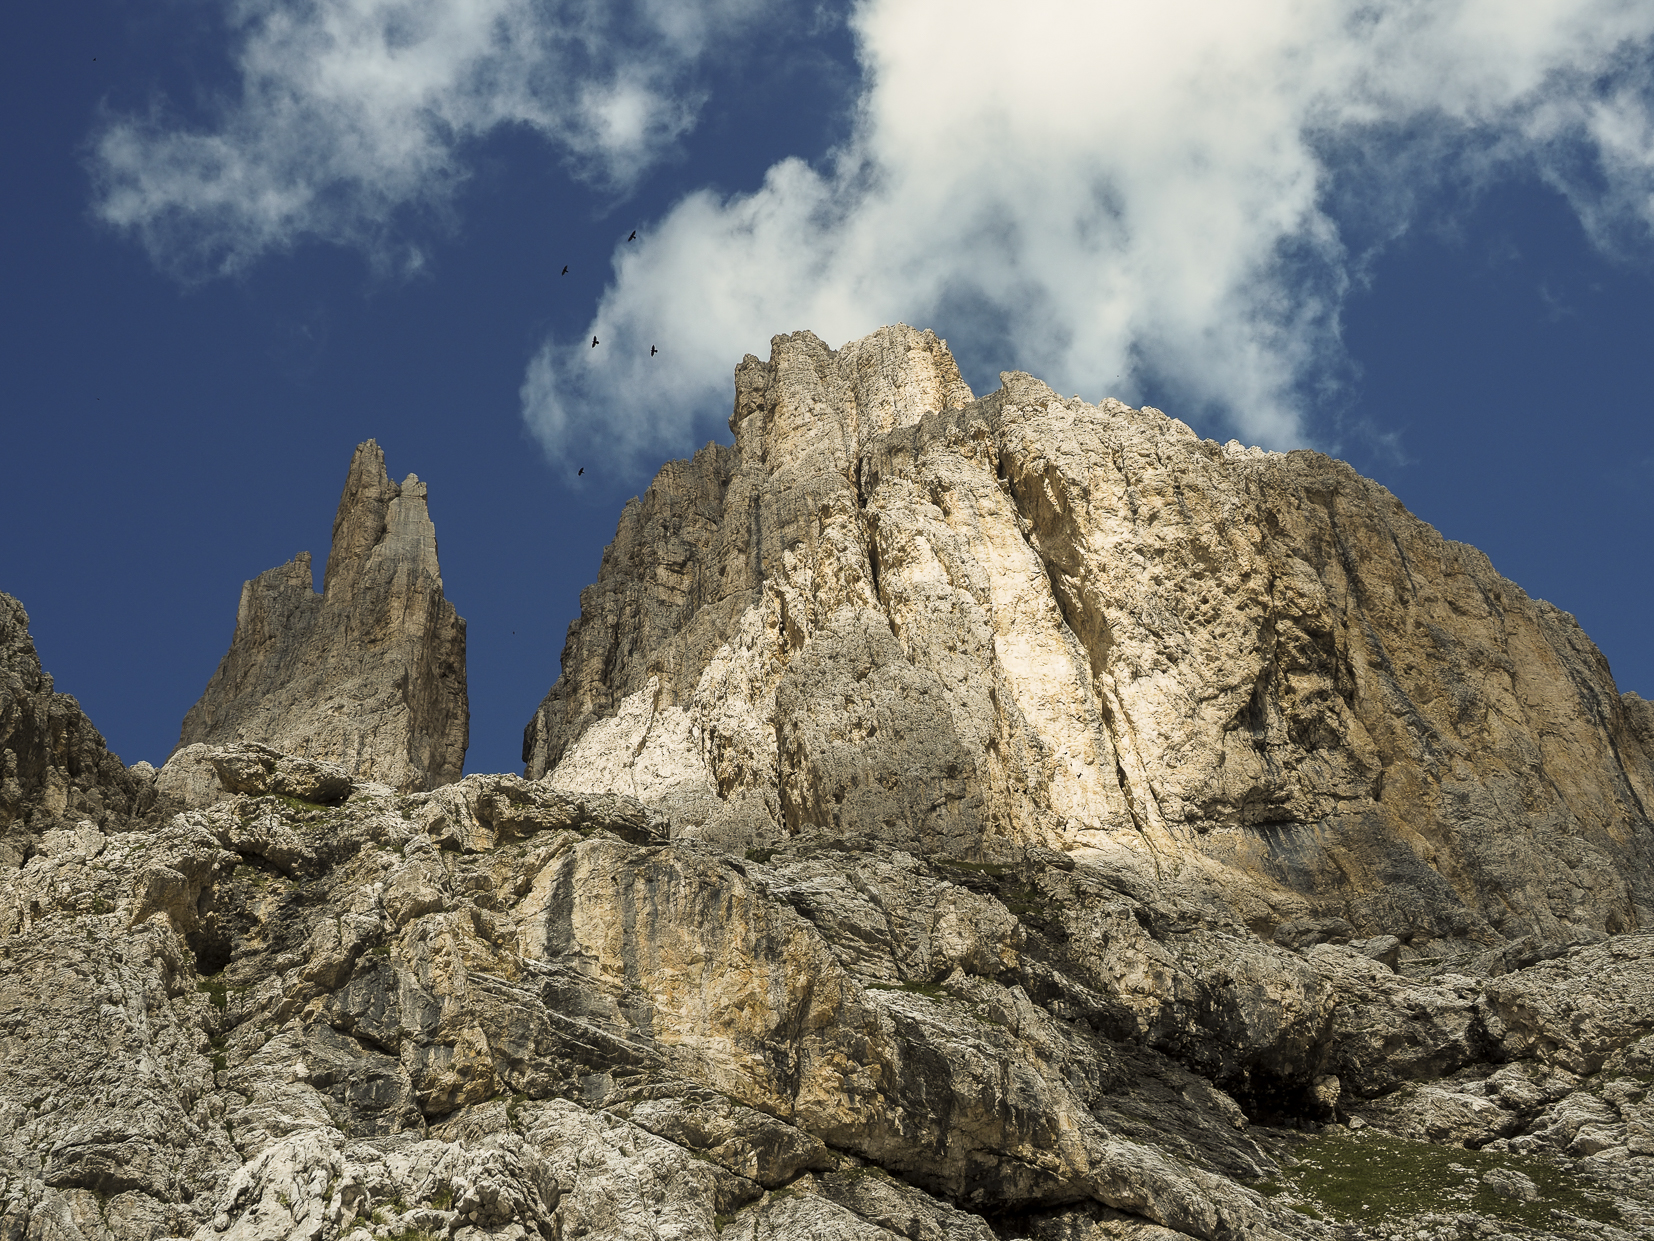 The Vajolet Towers seen from the Preuss Refuge...